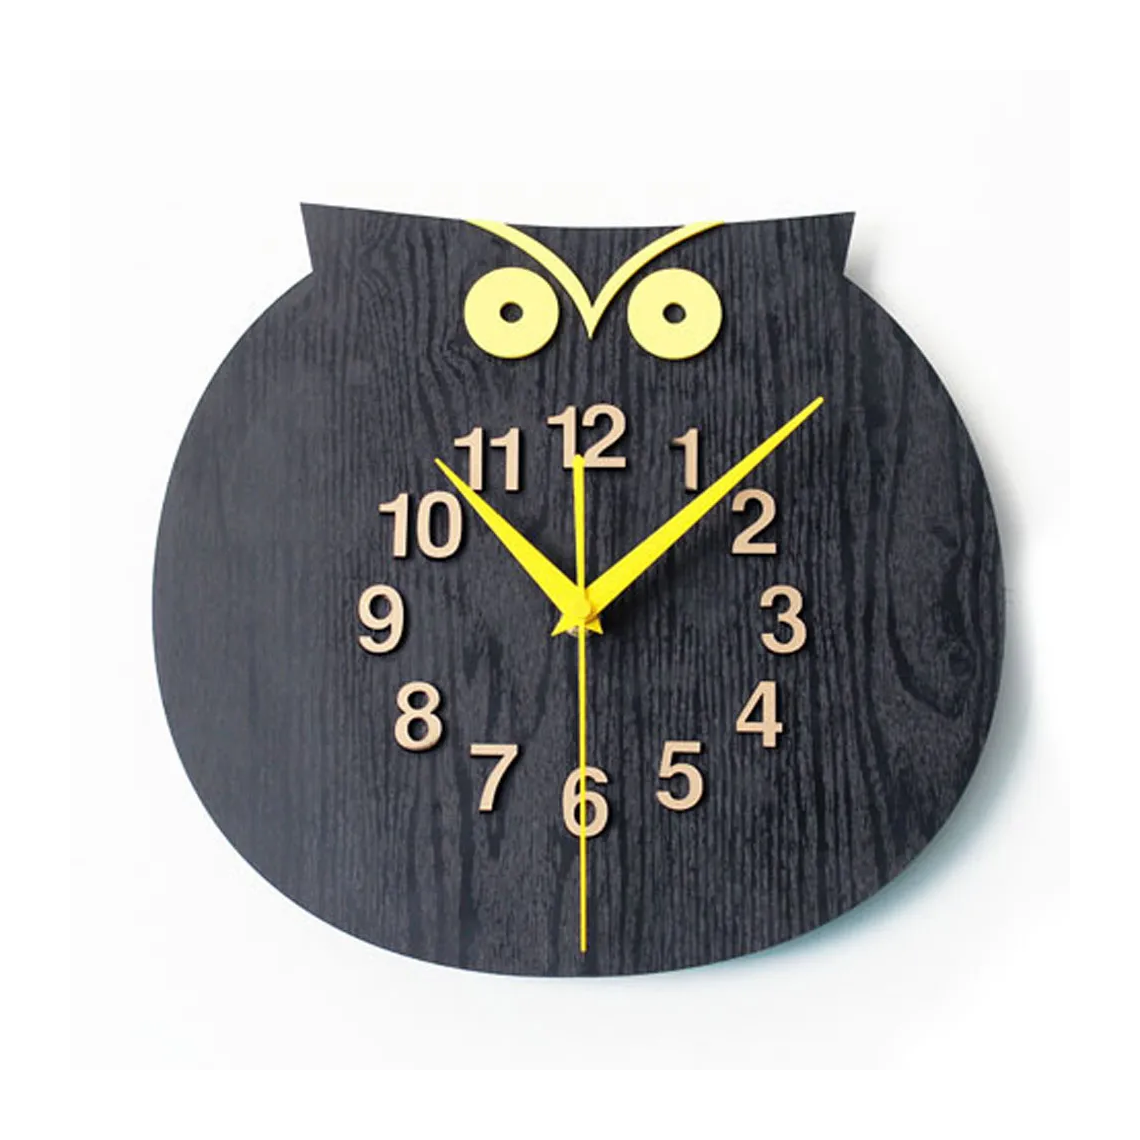 Wooden Owl Clock in a white background